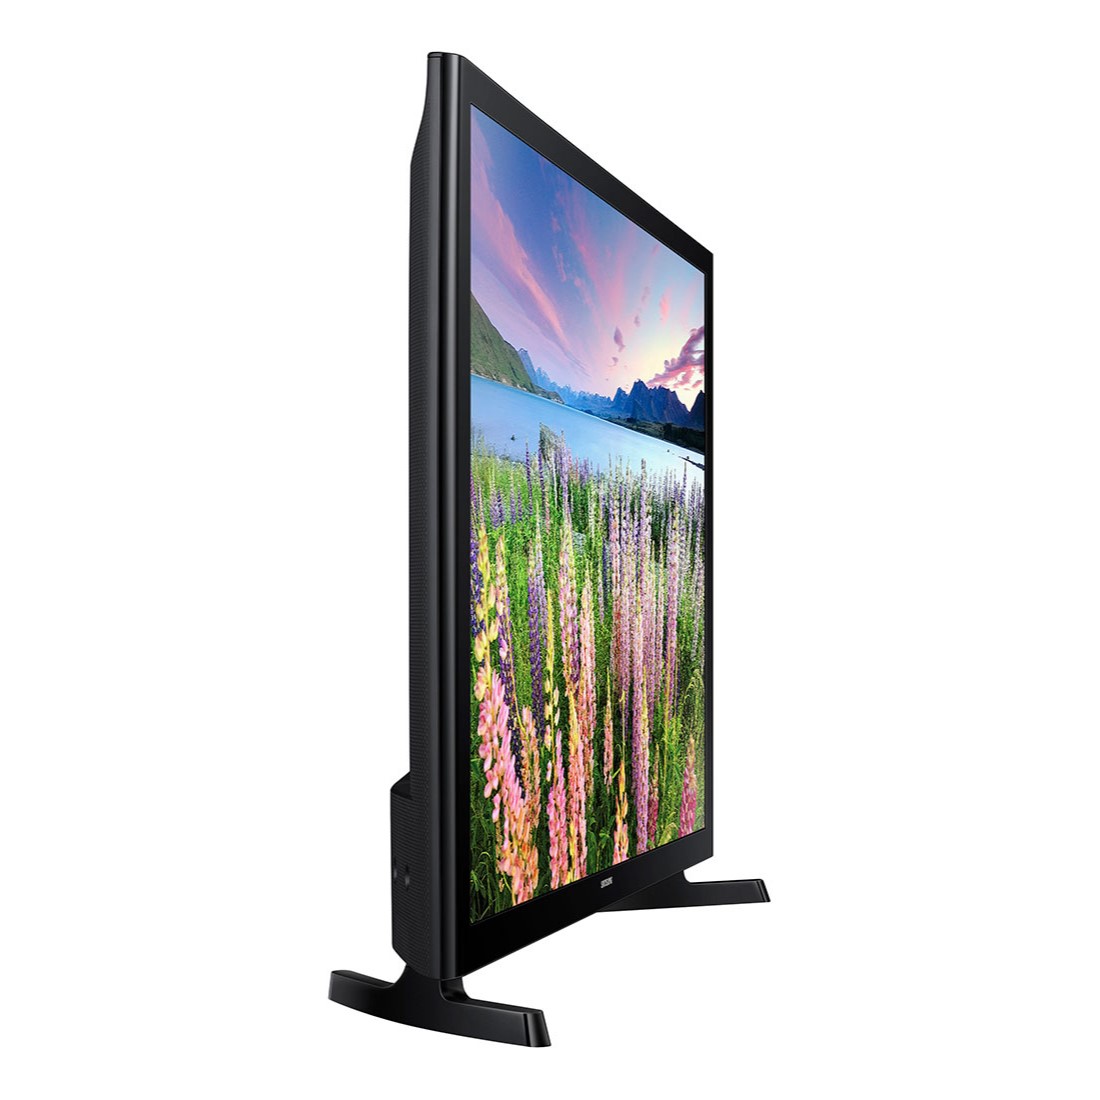 SAMSUNG 40" Class N5200 Series Full HD (1080P) LED Smart Television - UN40N5200AFXZA - image 4 of 5